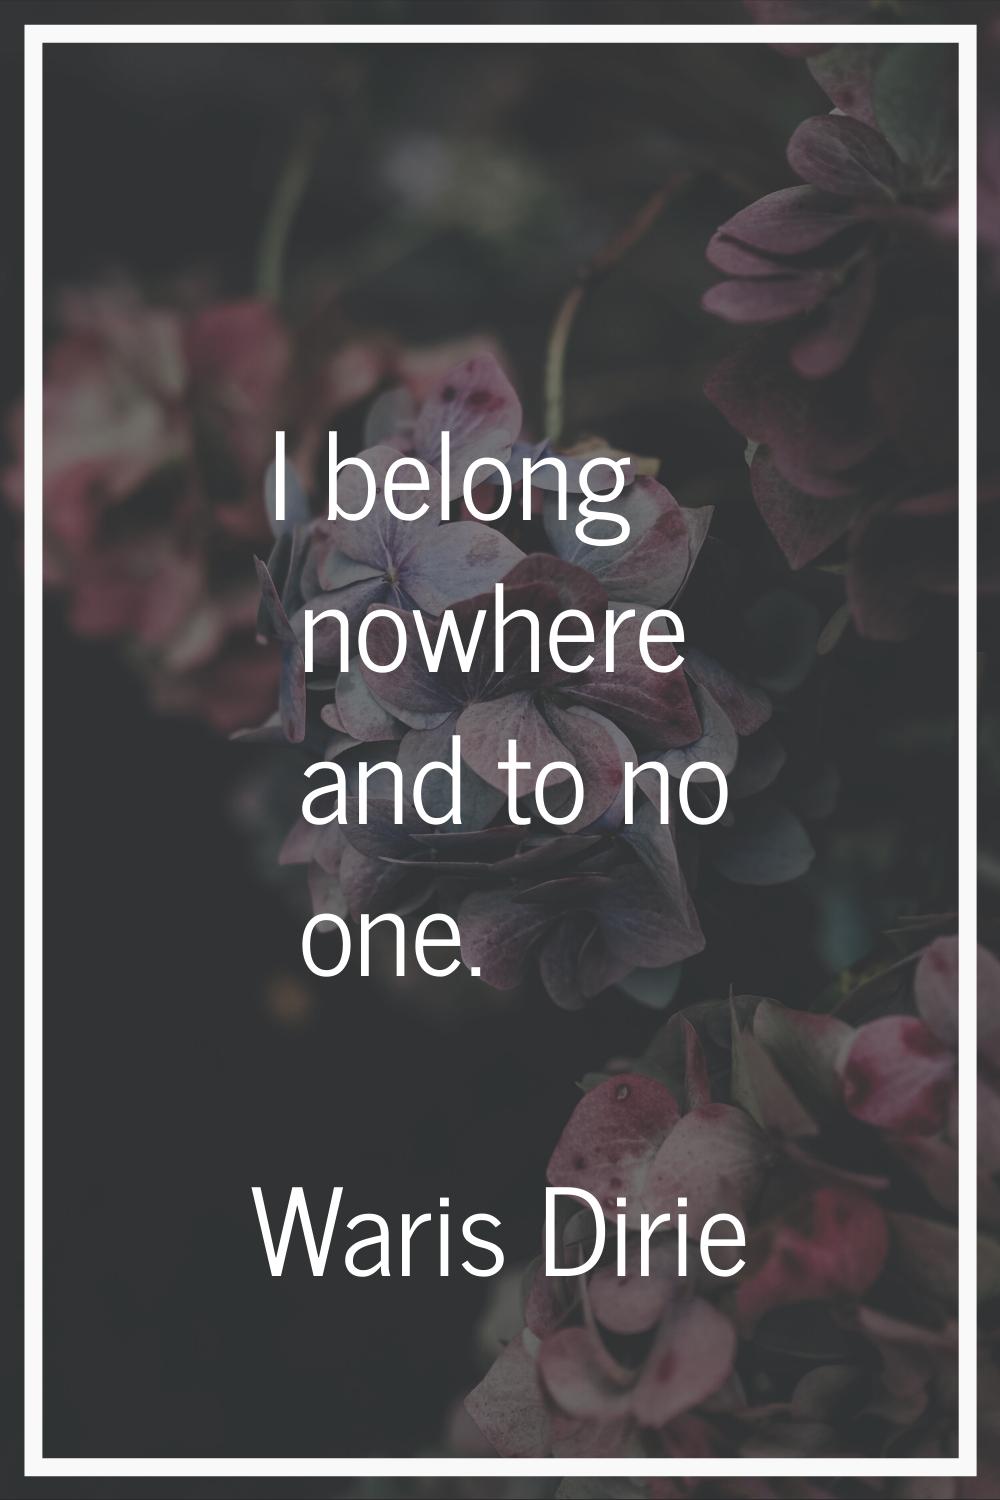 I belong nowhere and to no one.